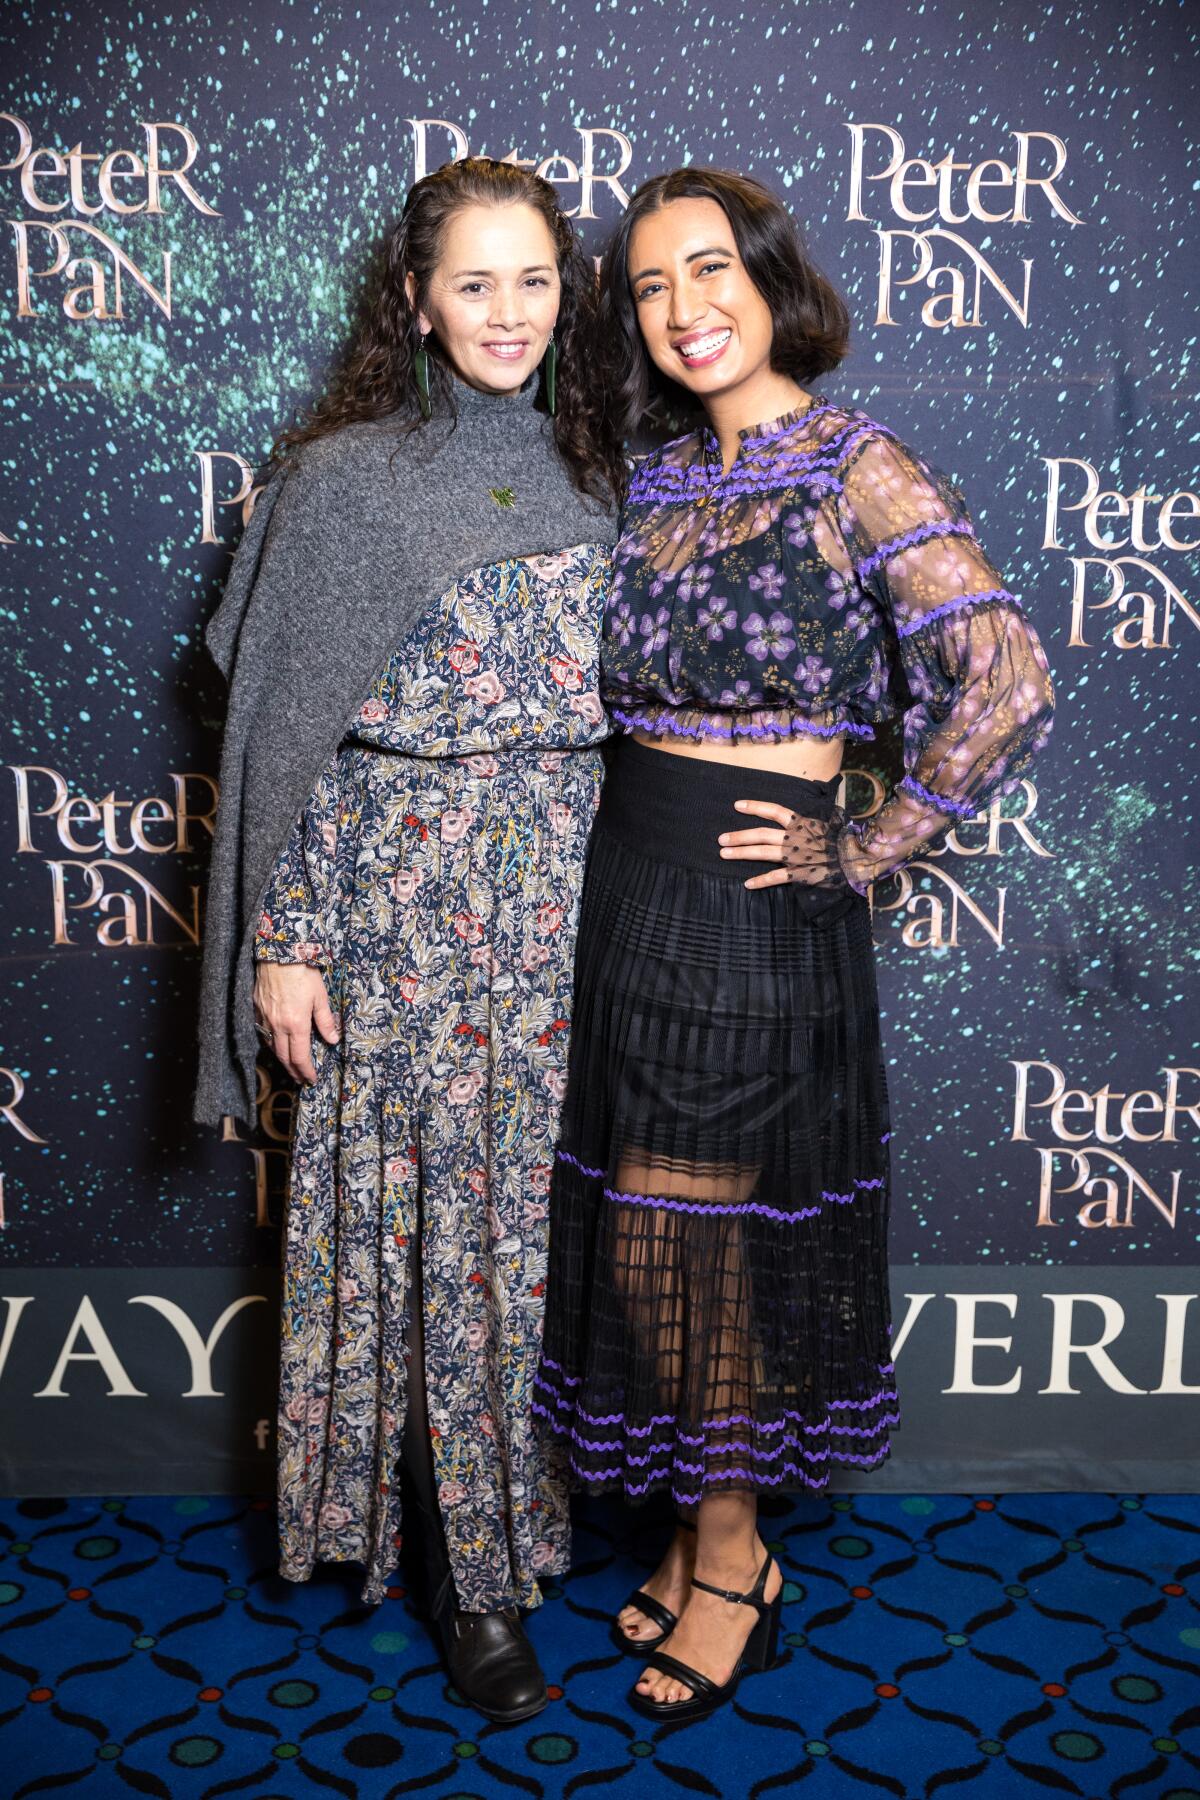 Larissa FastHorse, who wrote the new "Peter Pan" book, and Raye Zaragoza, who plays Tiger Lily onstage.